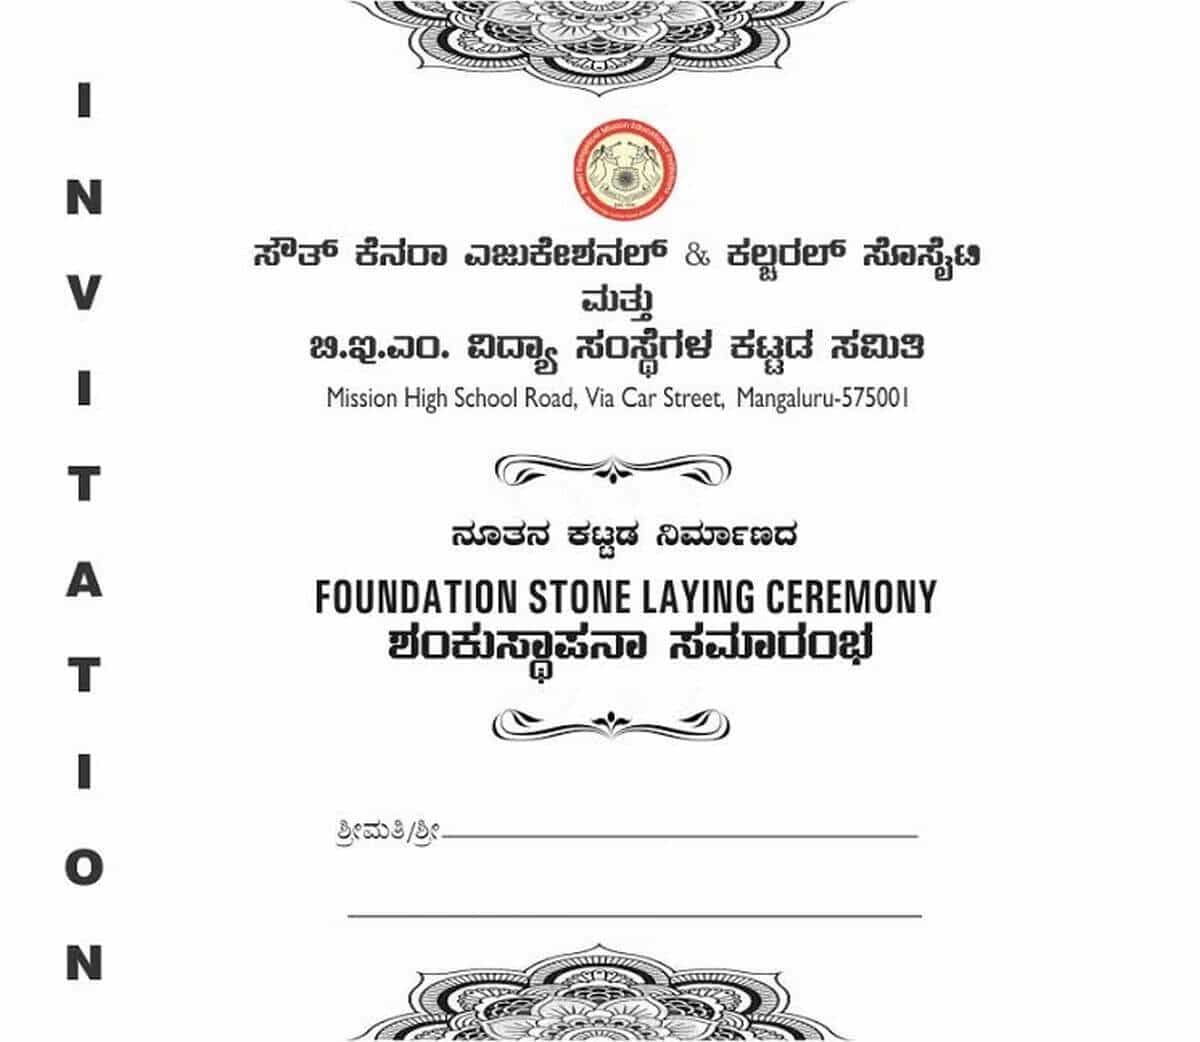 Invitation of the Foundation Stone Laying Ceremony of the New Block